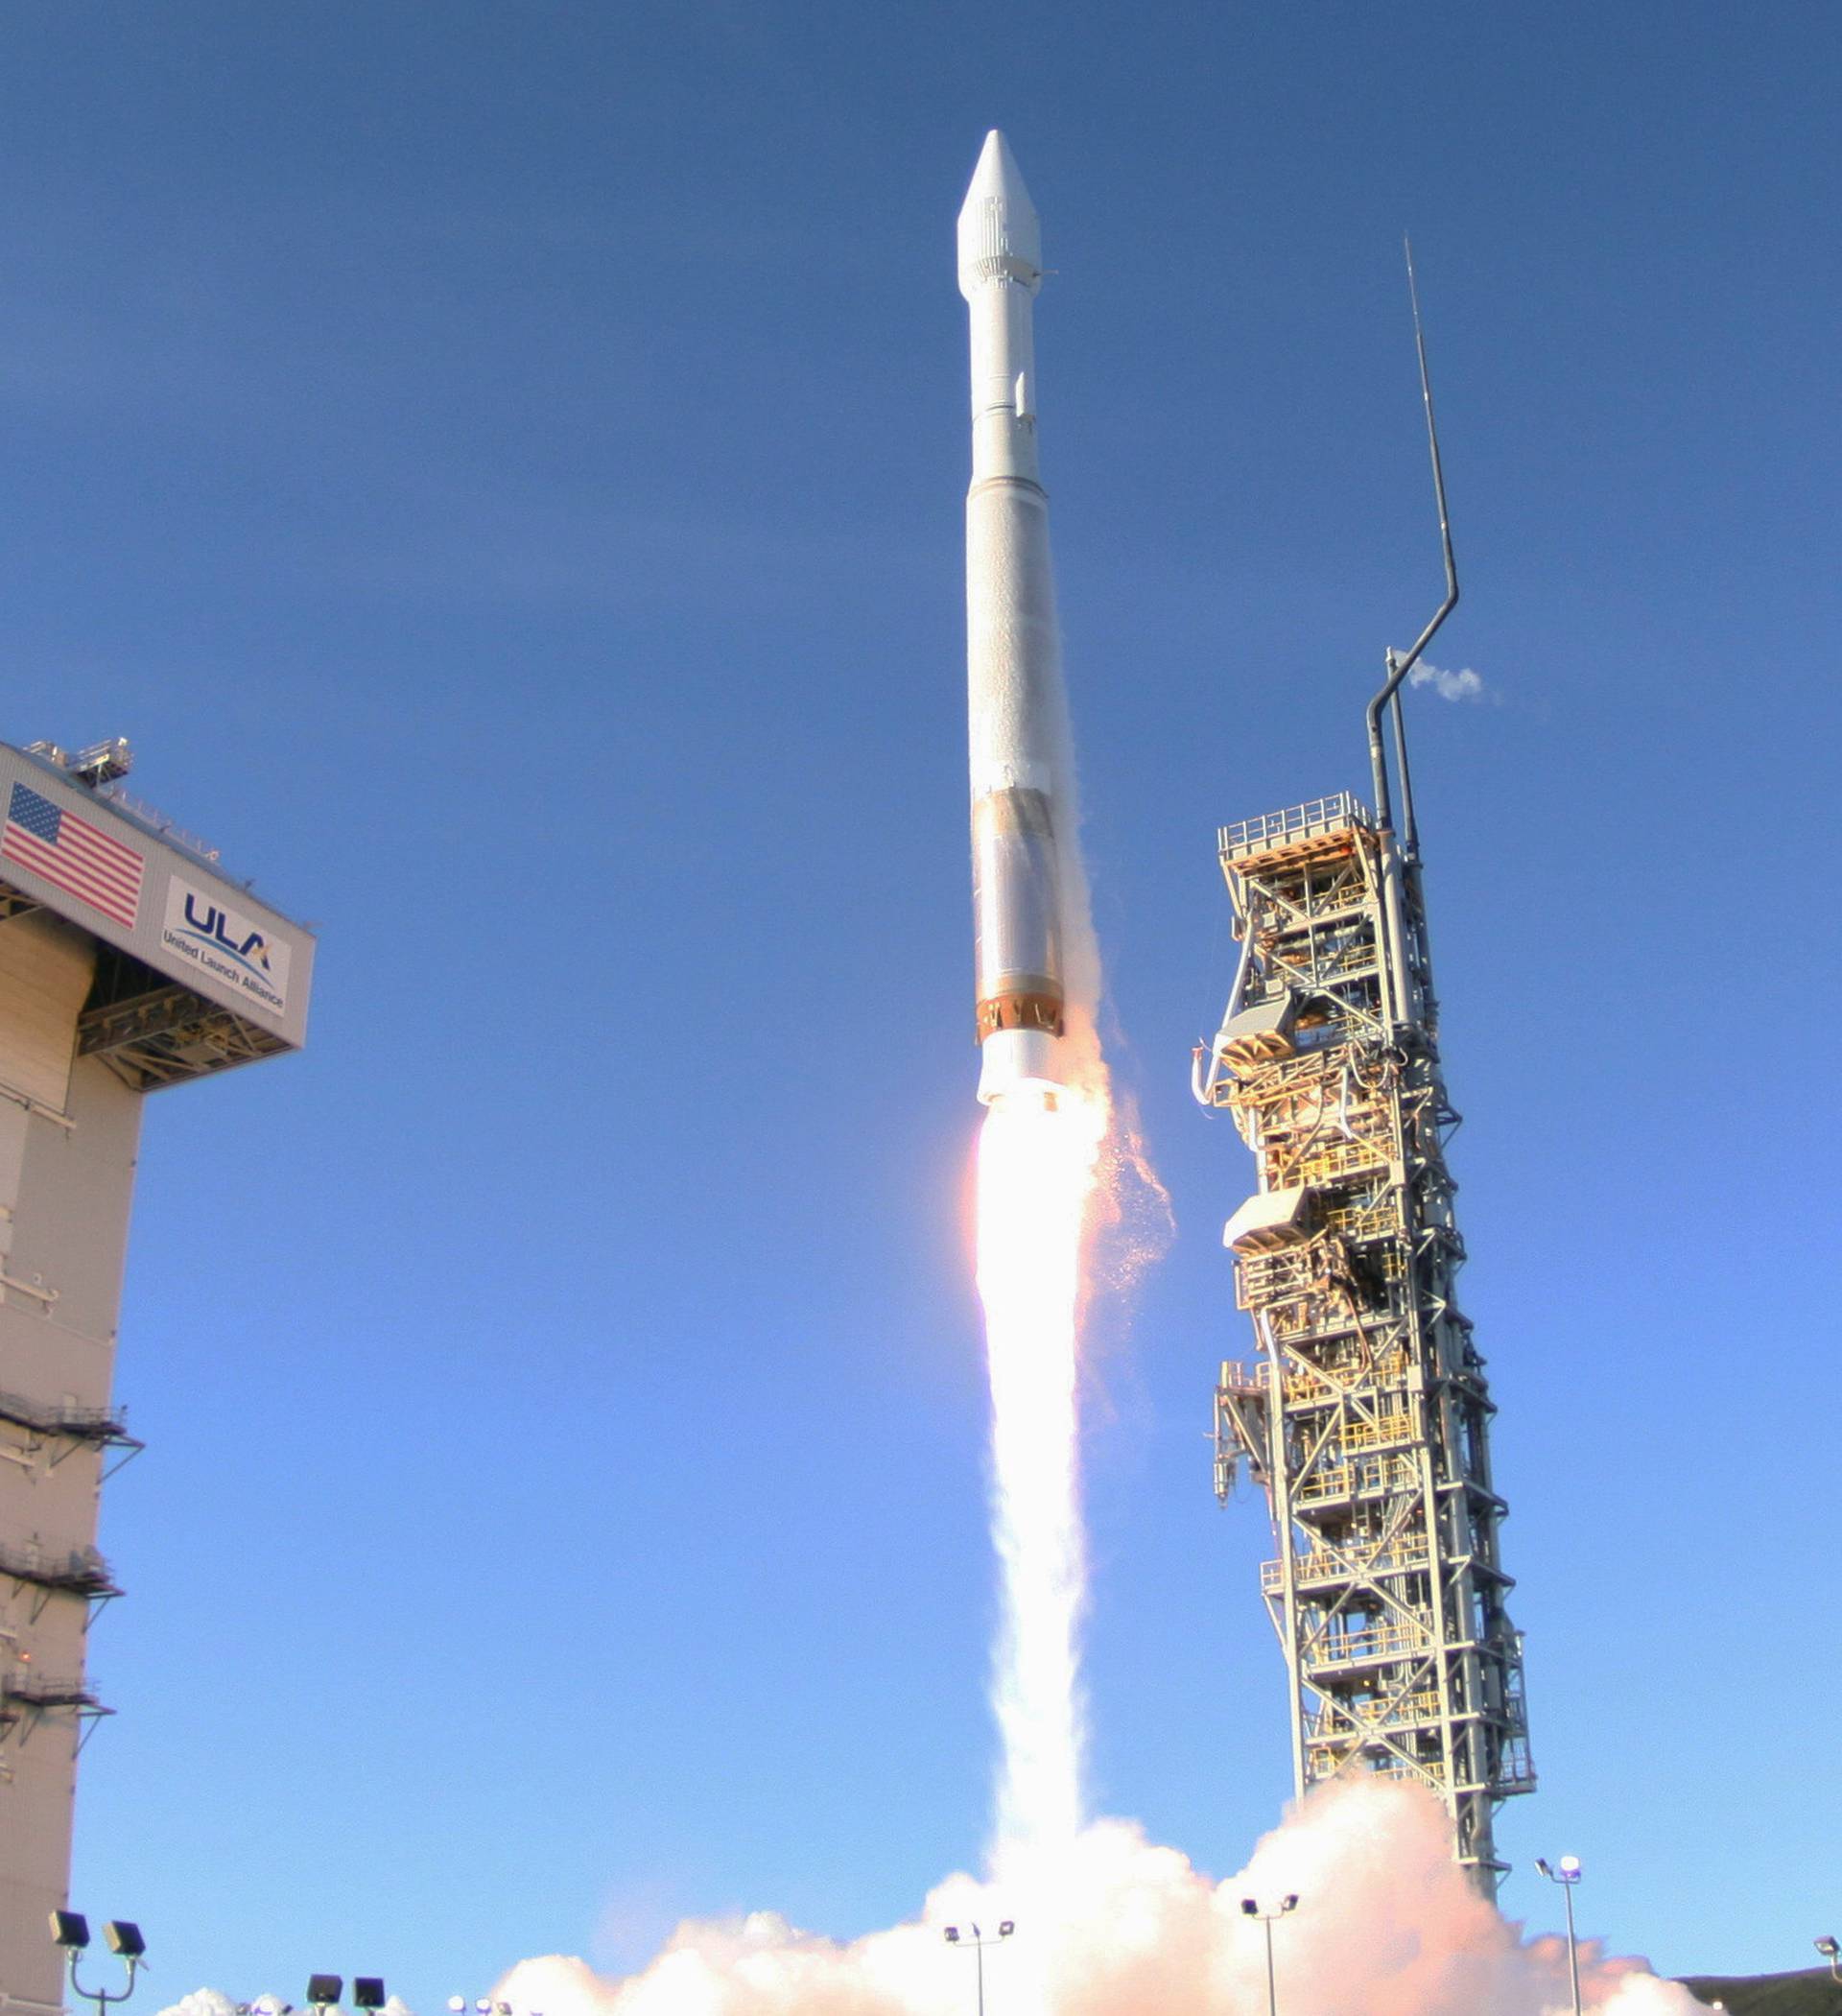 FILE PHOTO: An Atlas 5 ULA (United Launch Alliance) rocket carrying a satellite for the Defense Meteorological Satellite Program is launched from Vandenberg Air Force Base in California